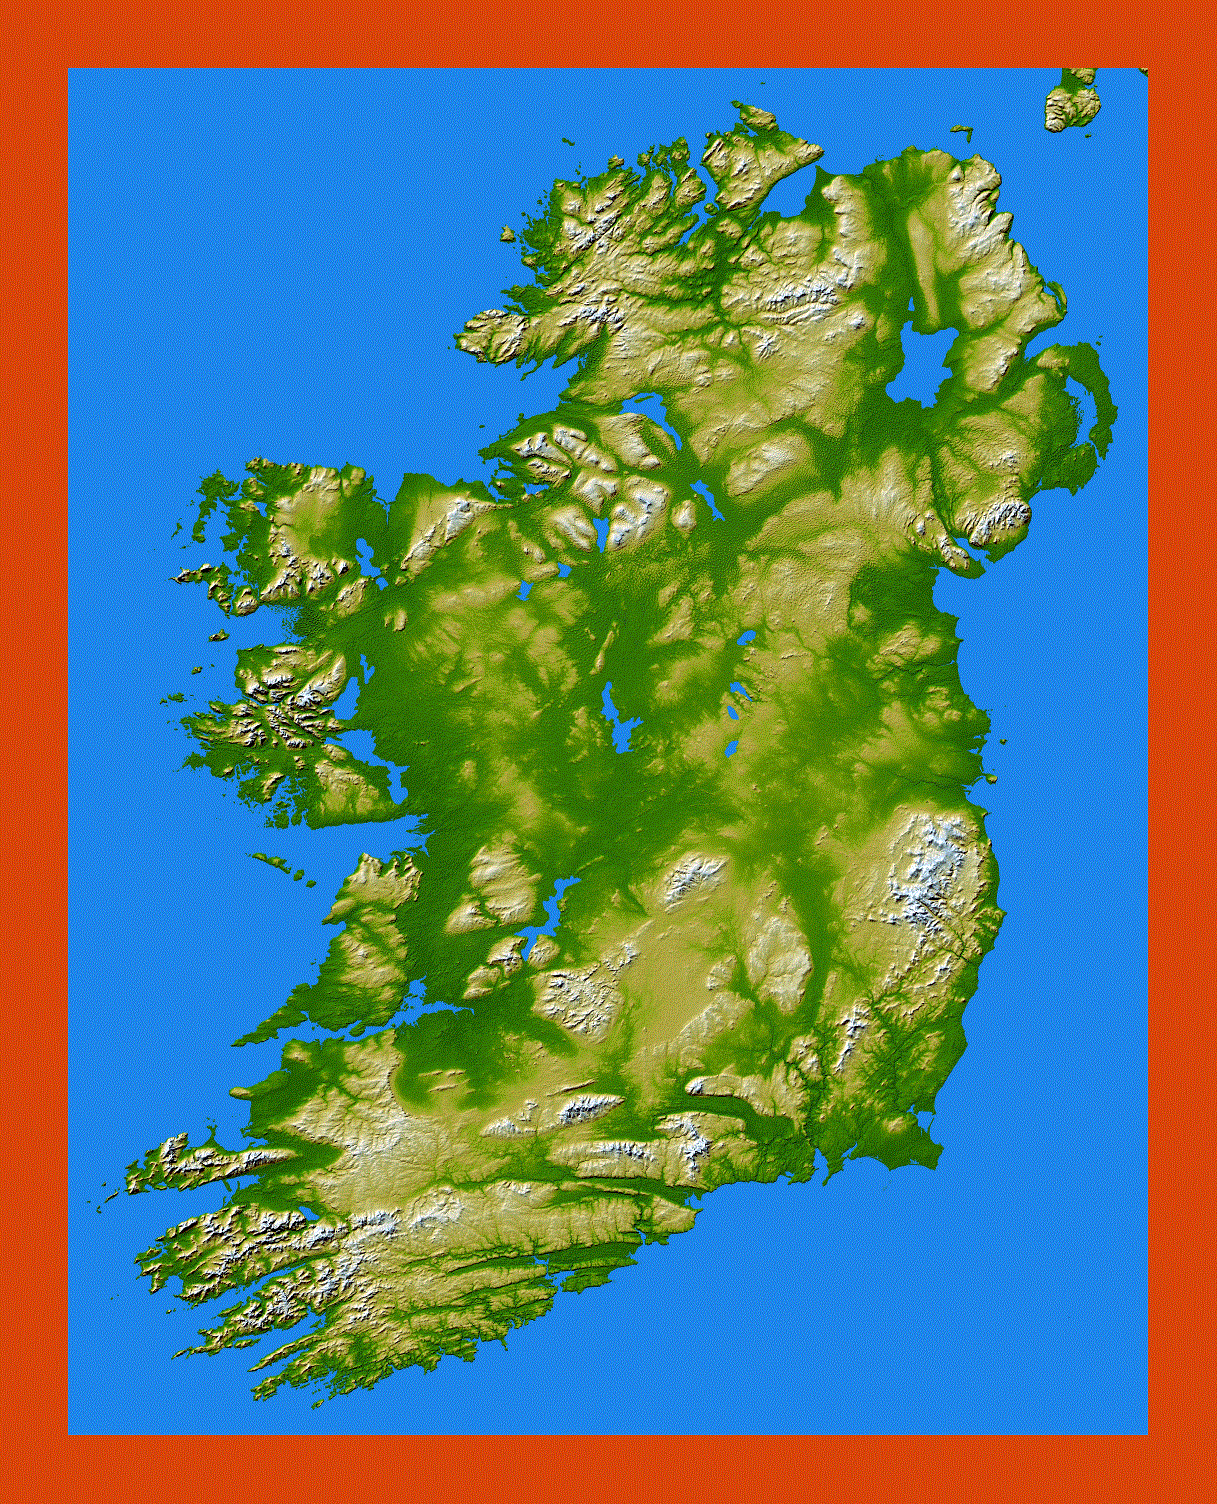 Topographical map of Ireland